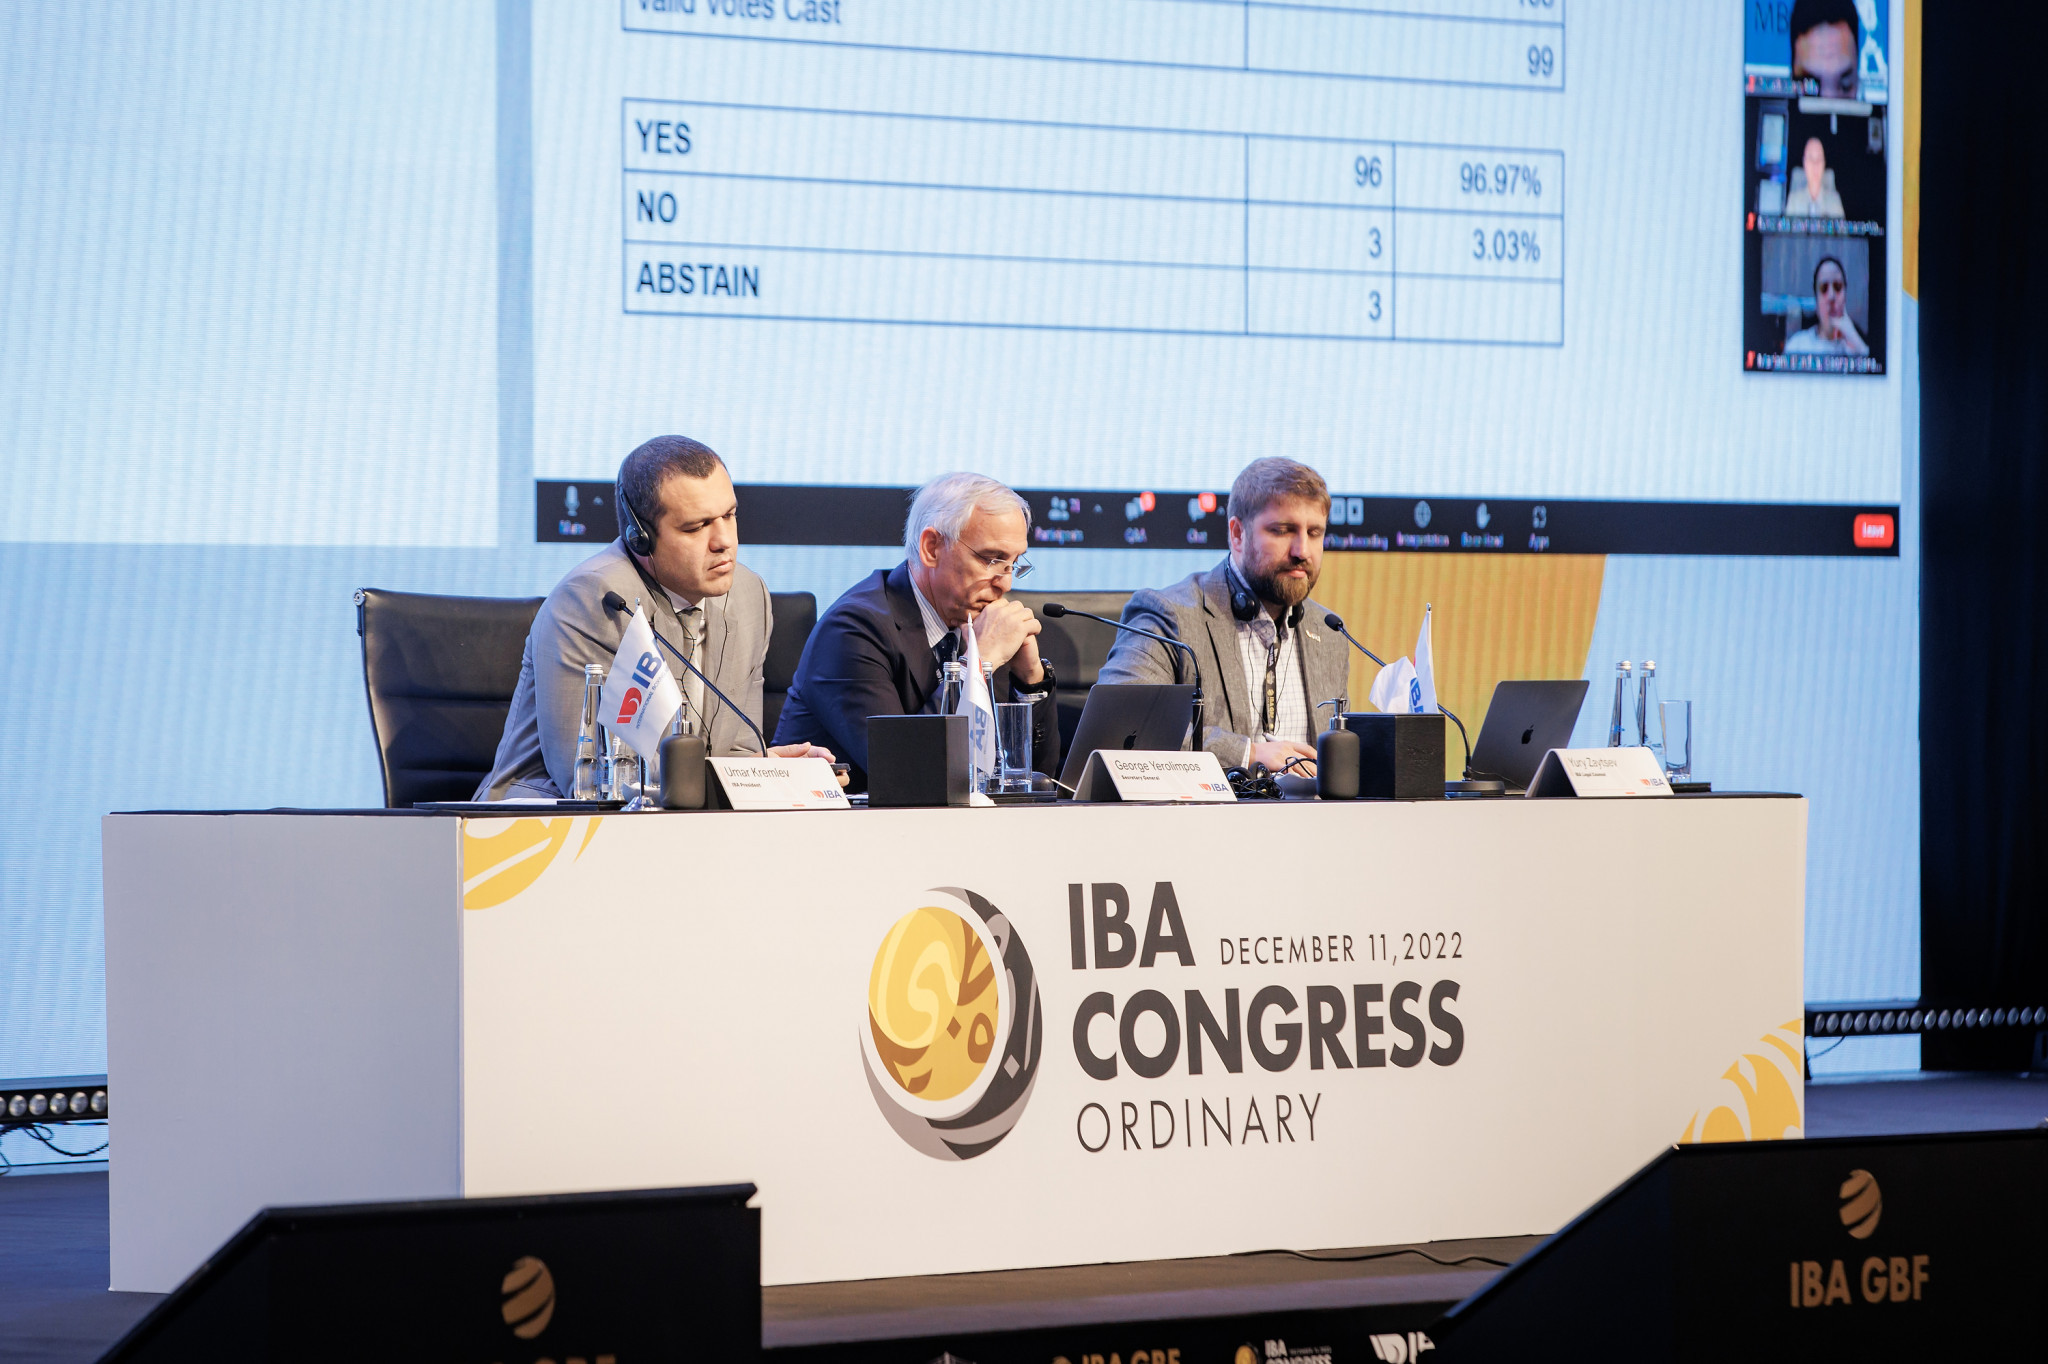 The IBA Ordinary Congress headlined the final day's agenda at the Global Boxing Forum in Abu Dhabi ©IBA